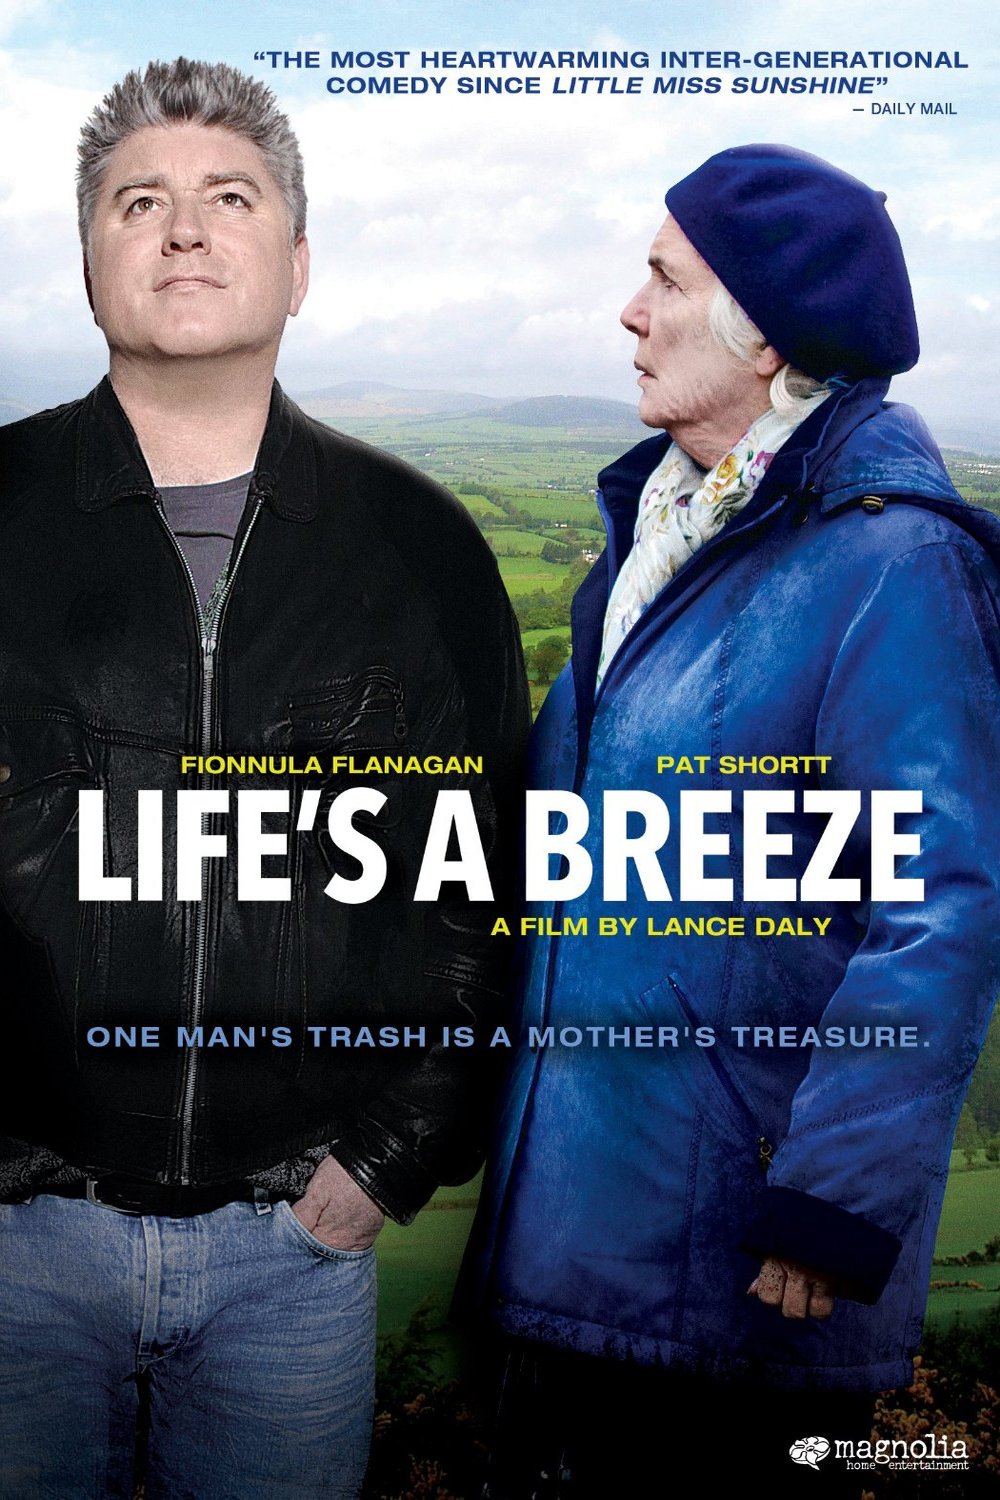 Poster of the movie Life's a Breeze